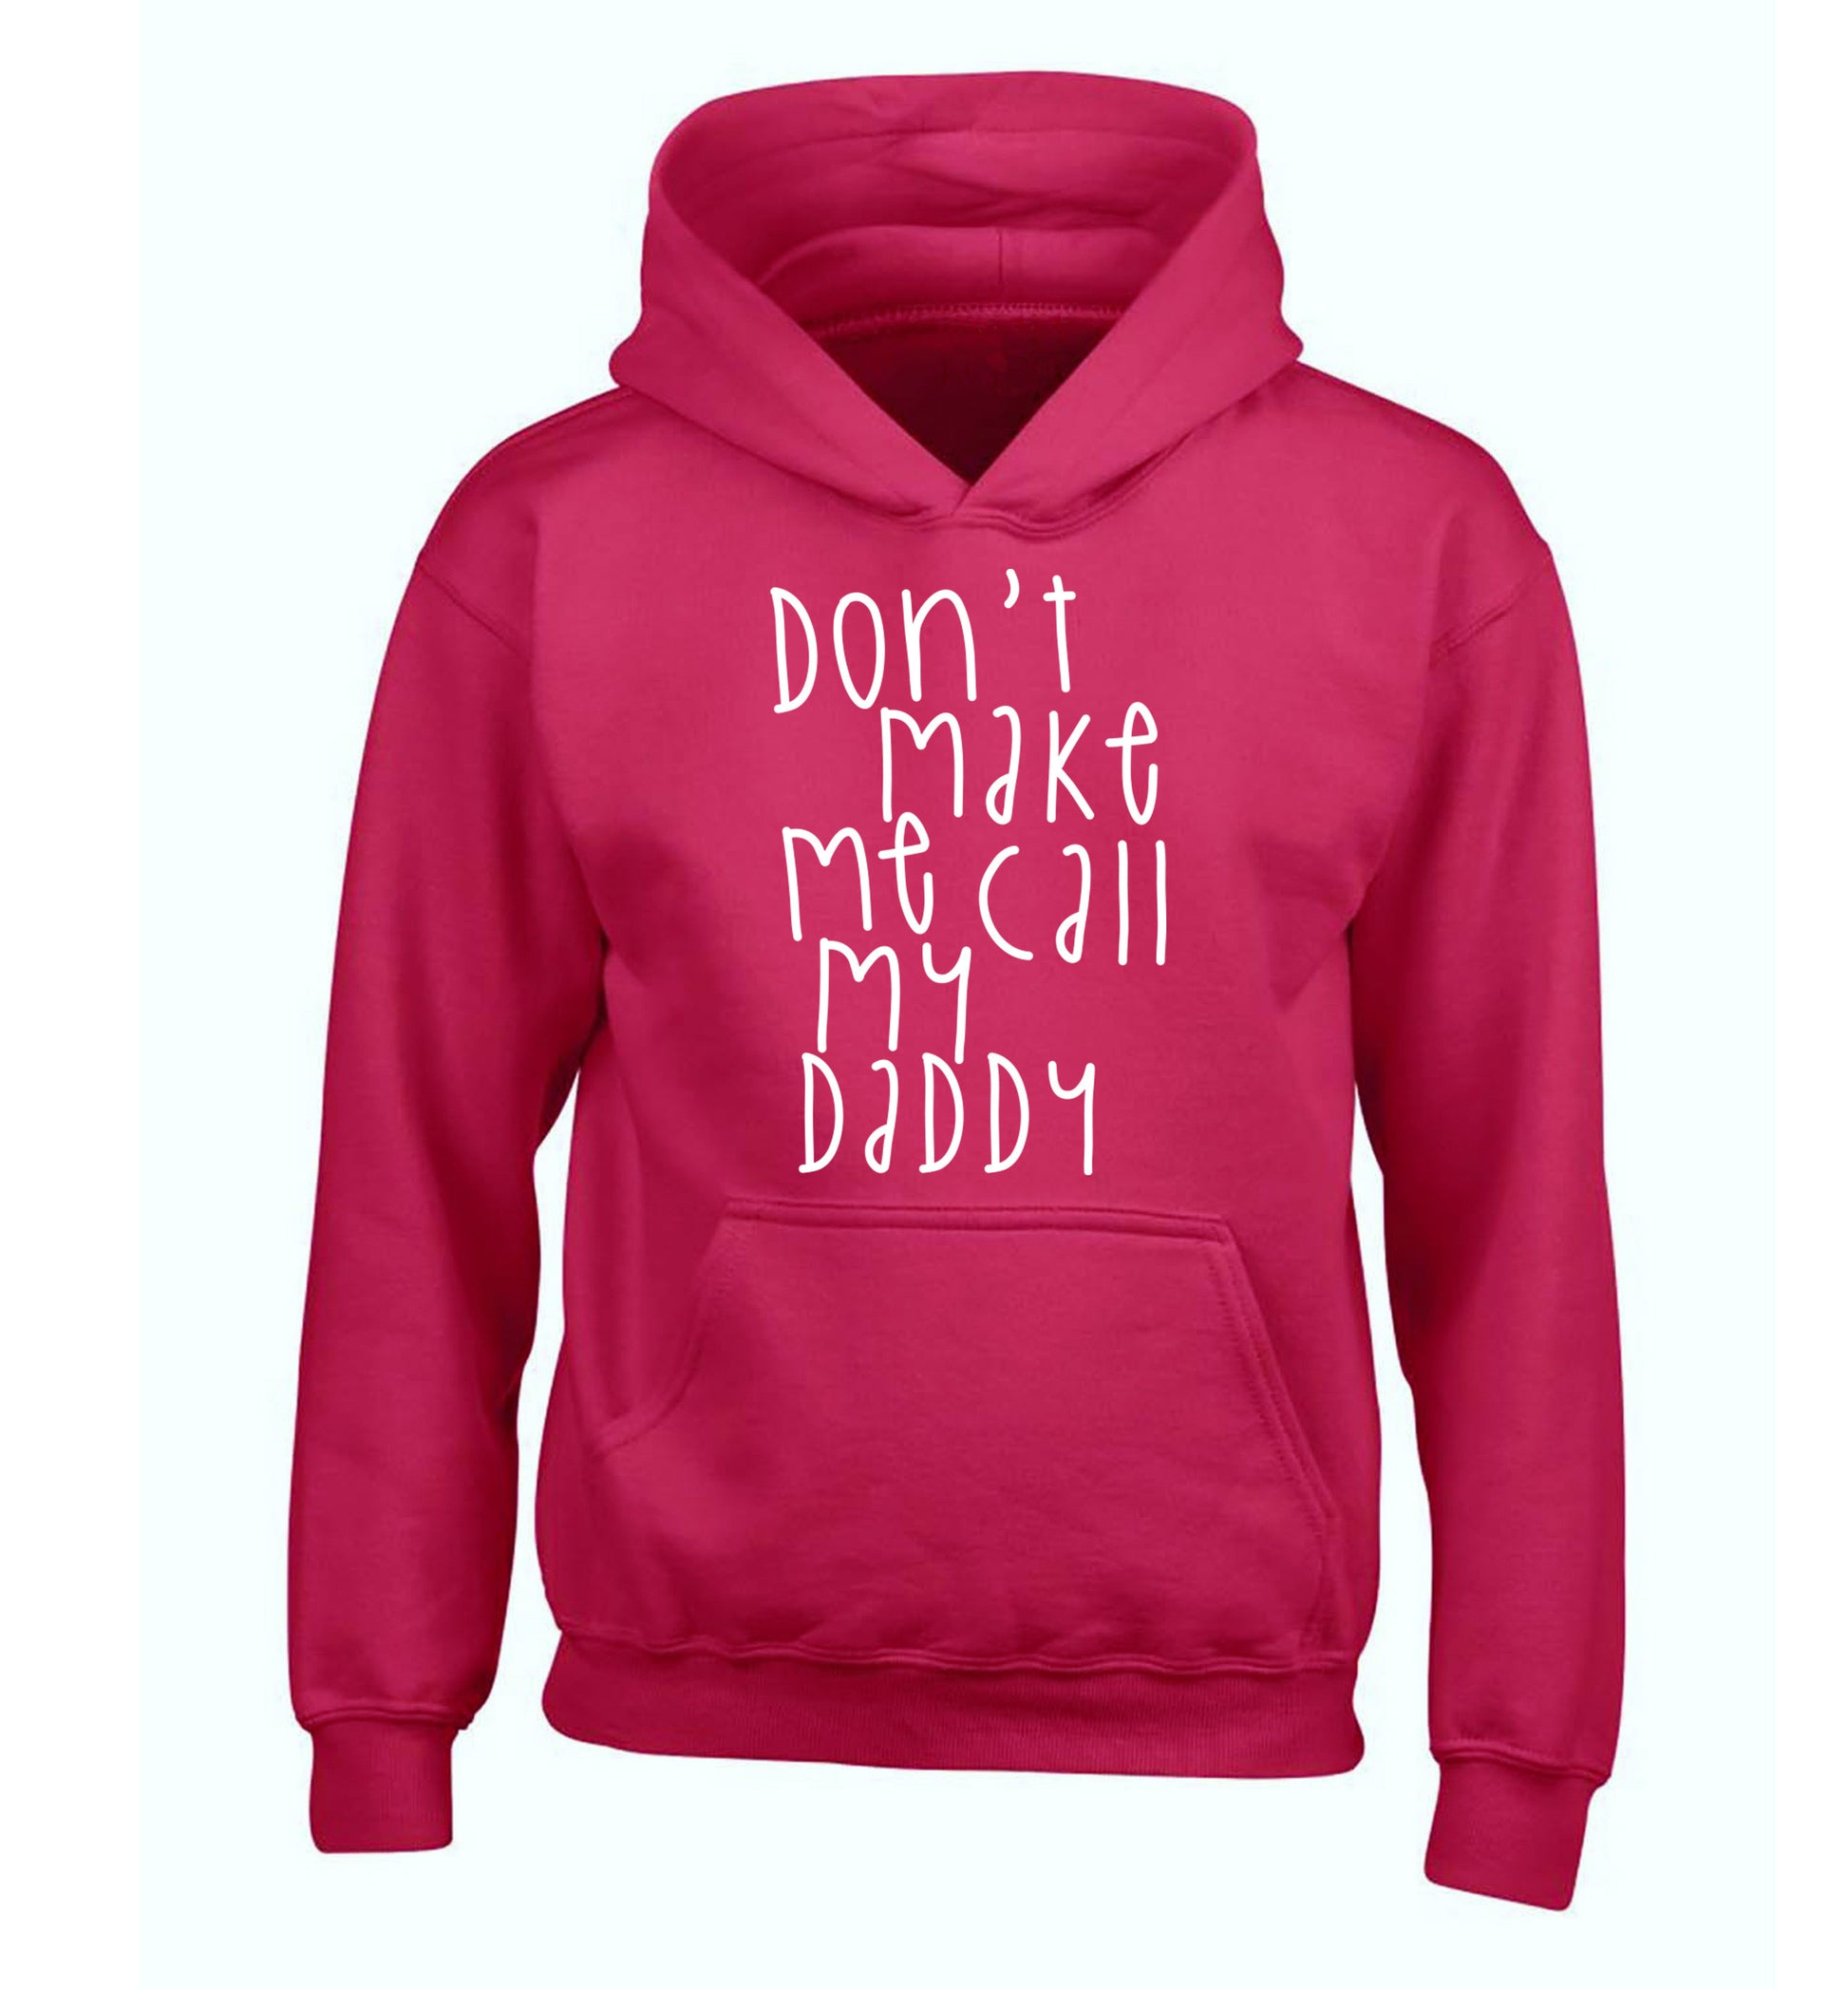 Don't make me call my daddy children's pink hoodie 12-14 Years